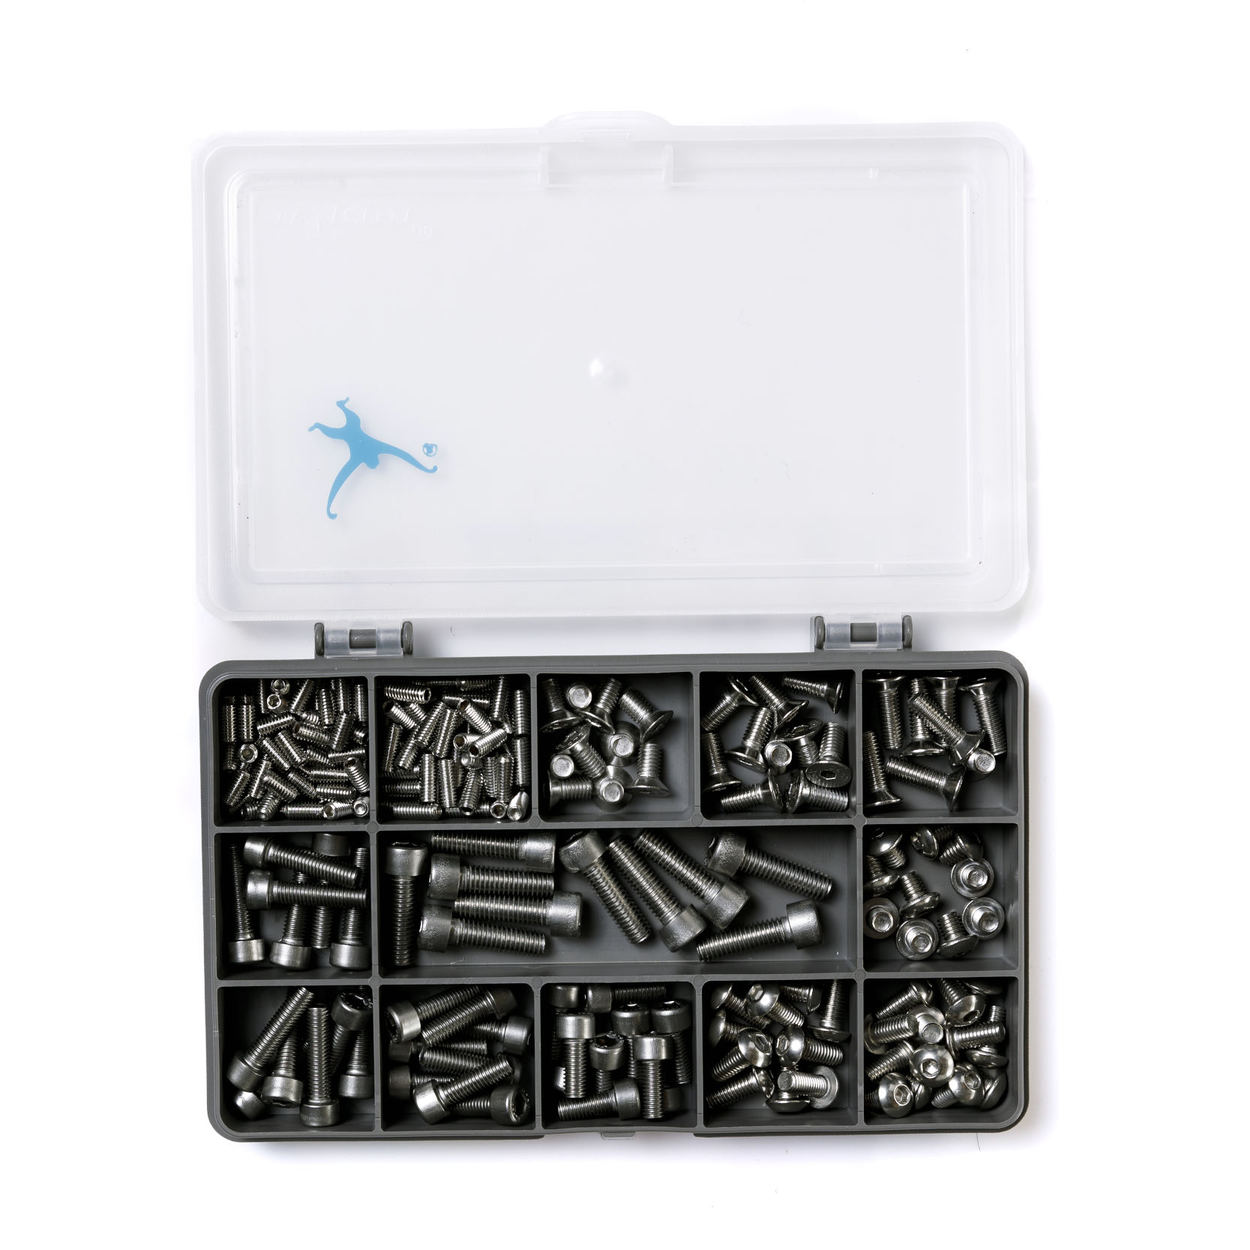 57 ASSORTED PIECE BLACK A2 STAINLESS M5 M6 M8 M10 WING BUTTERFLY NUTS BIKE KIT 